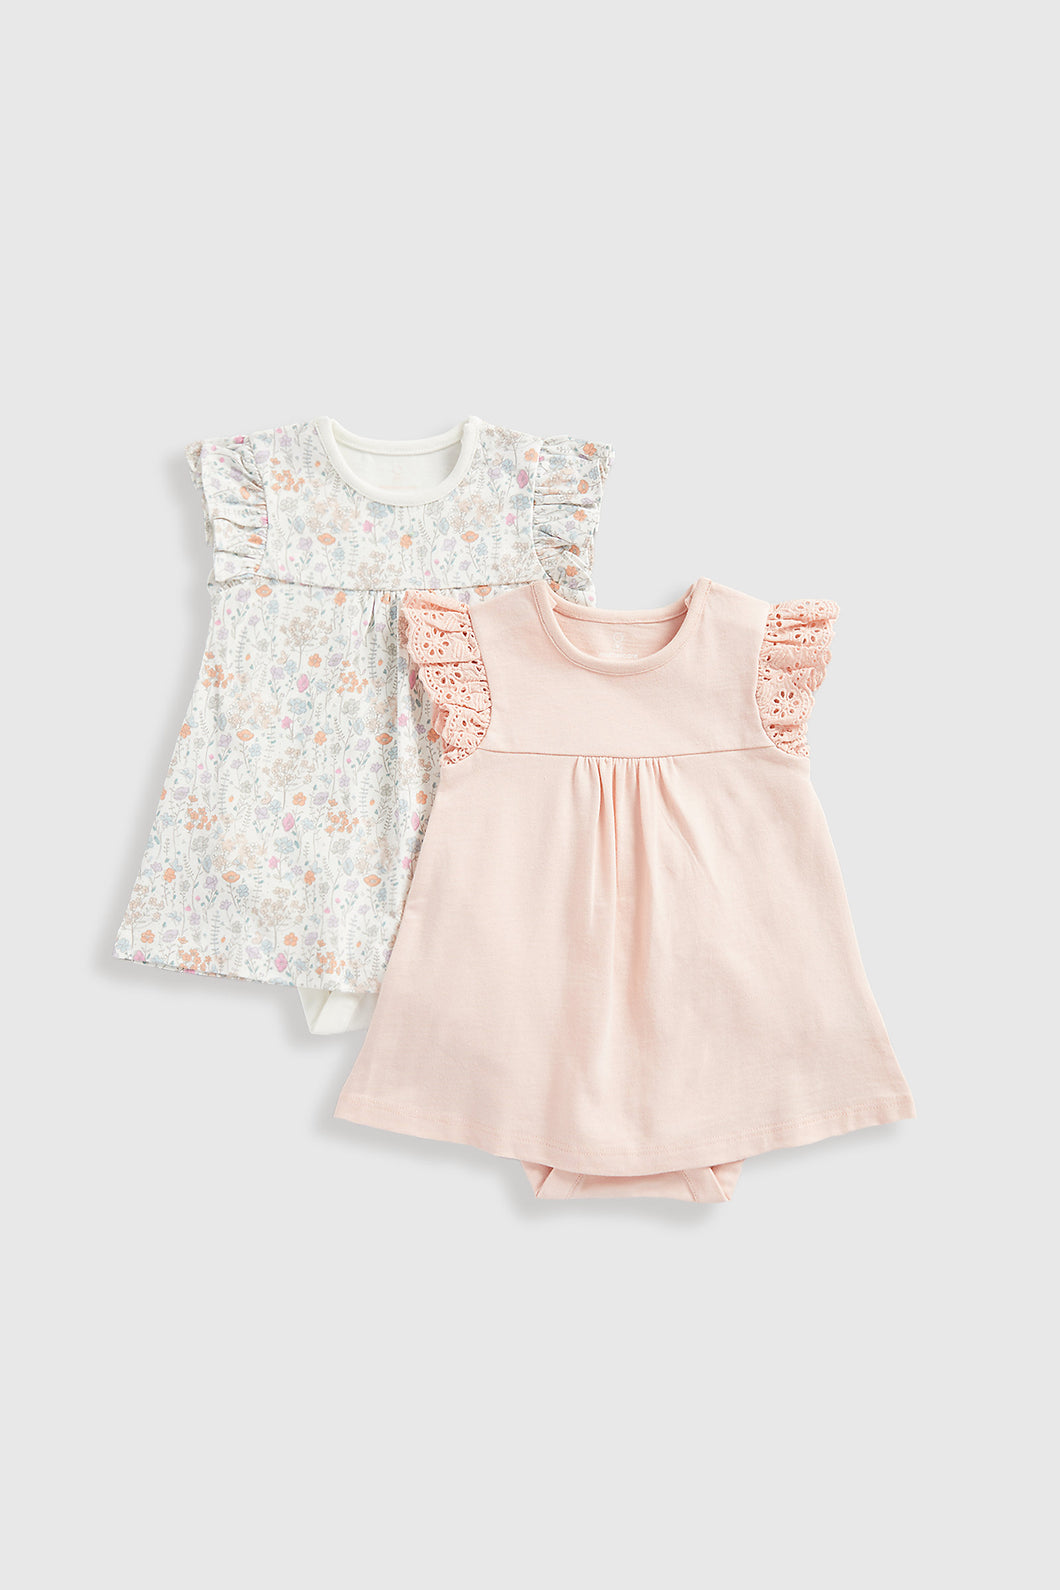 Mothercare Floral And Pink Romper Dresses - 2 Pack